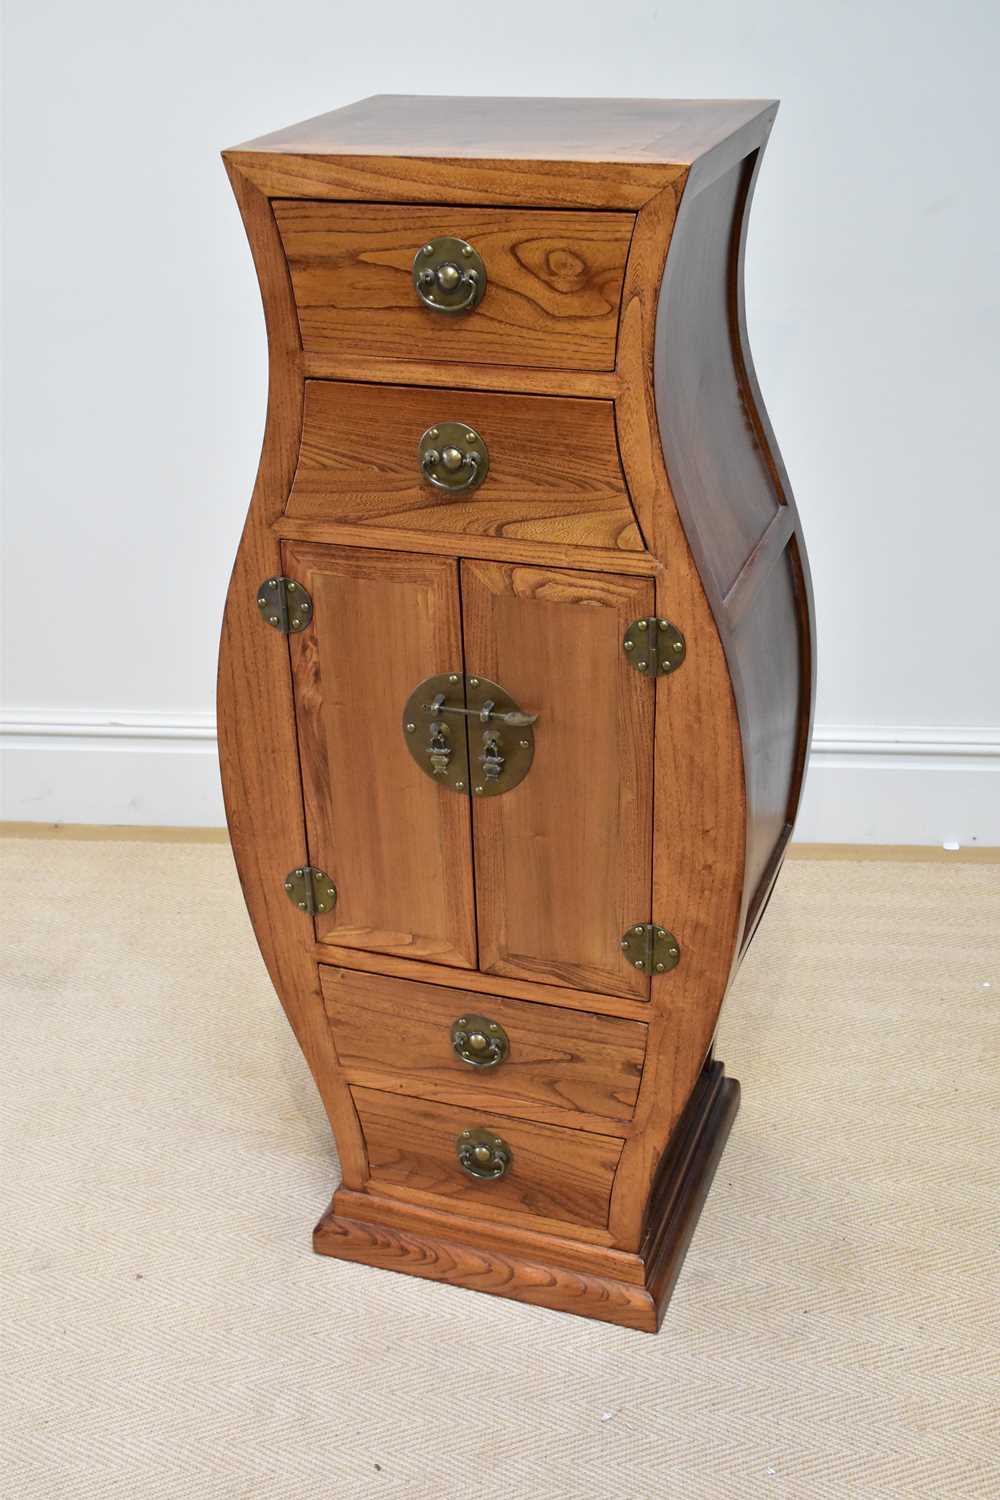 A modern Chinese rosewood vase shaped cabinet with an arrangement of four drawers and two panelled